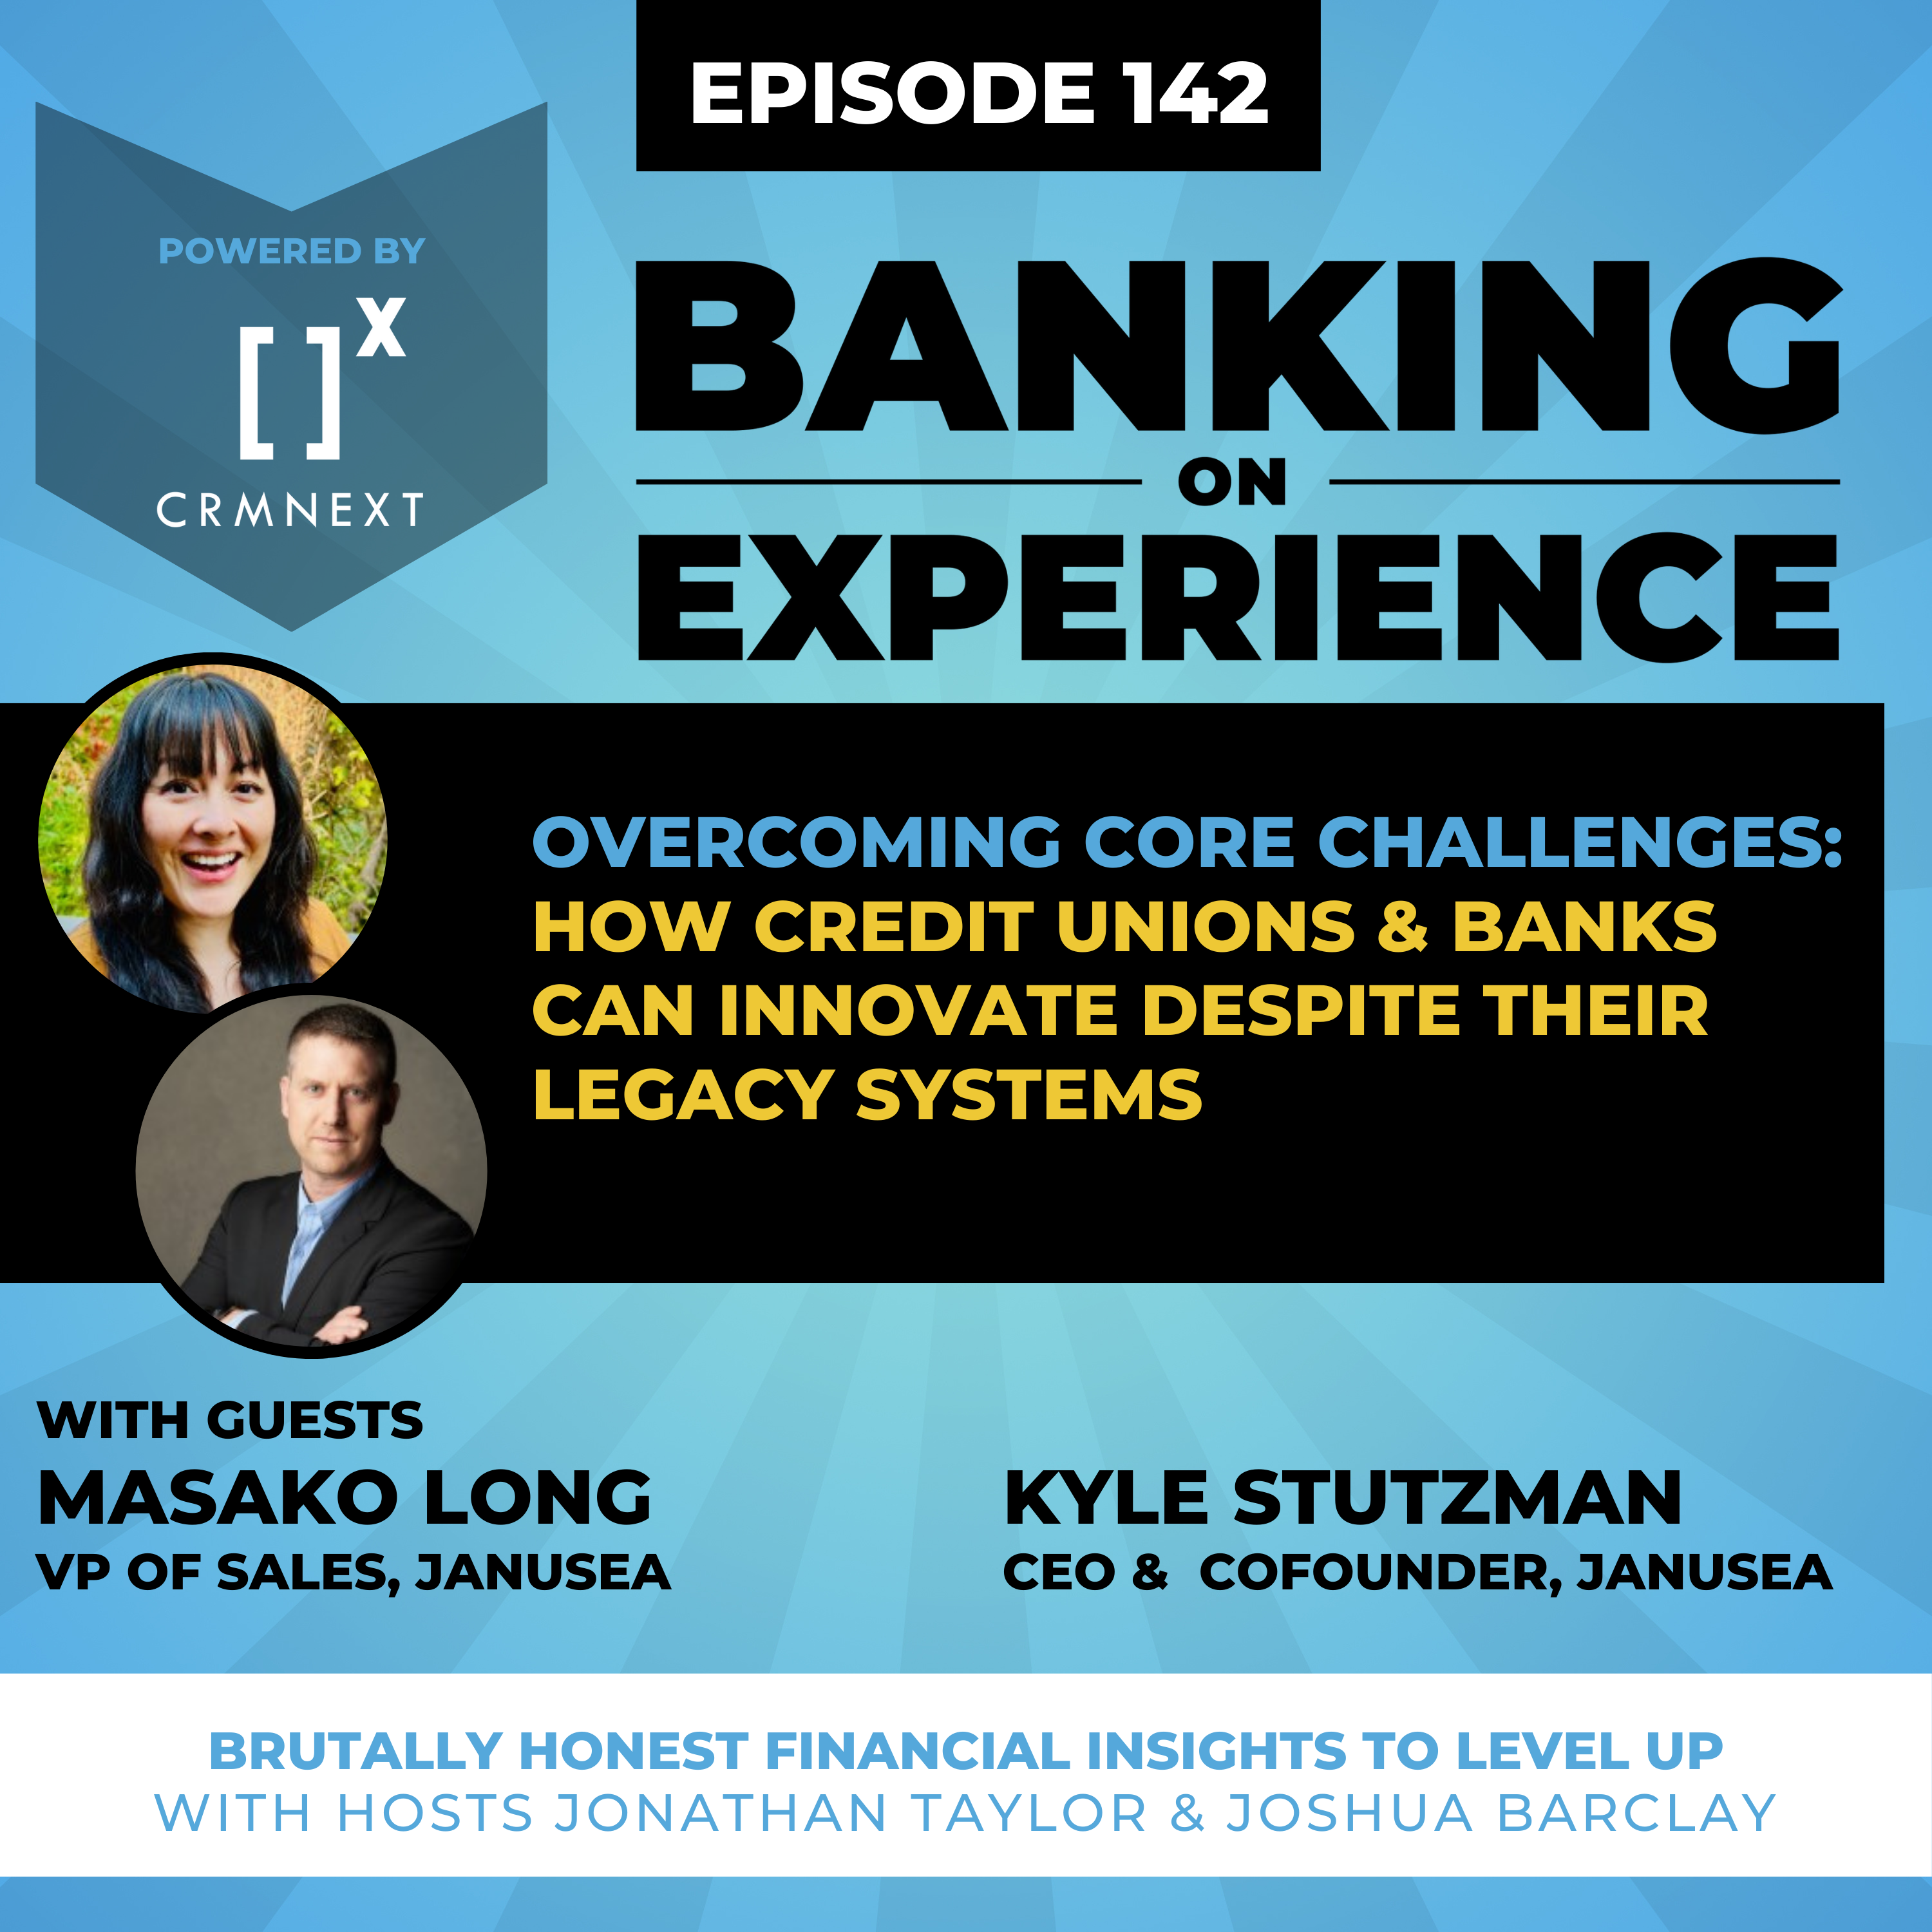 Overcoming Core Challenges:  How Credit Unions & Banks can innovate despite their Legacy Systems